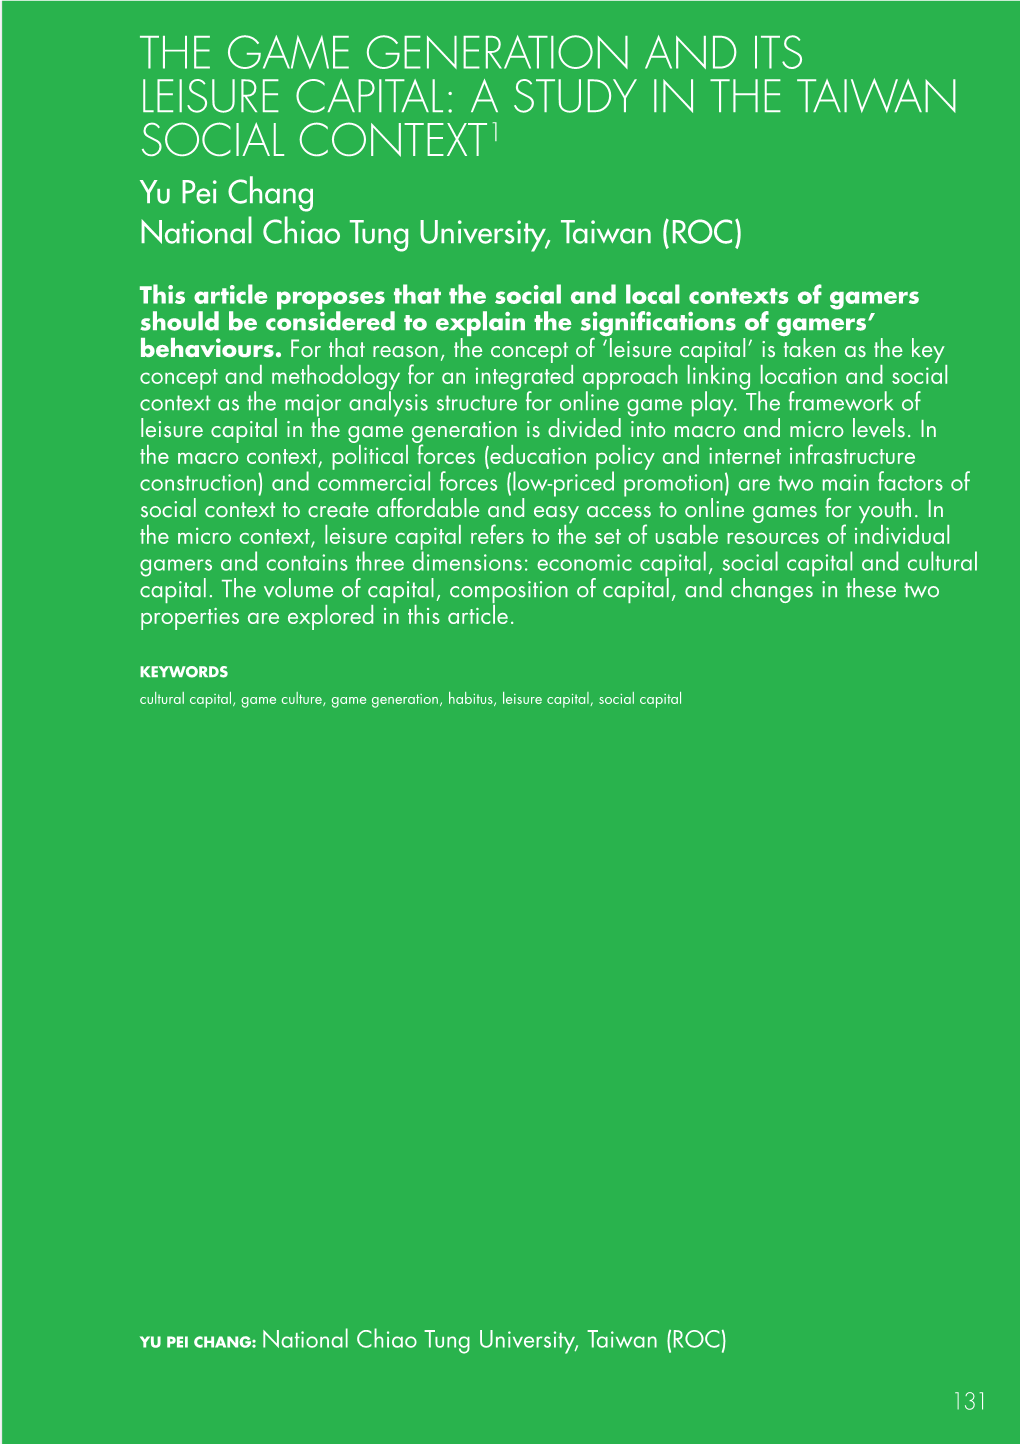 THE GAME GENERATION and ITS LEISURE CAPITAL: a STUDY in the TAIWAN SOCIAL CONTEXT1 Yu Pei Chang National Chiao Tung University, Taiwan (ROC)